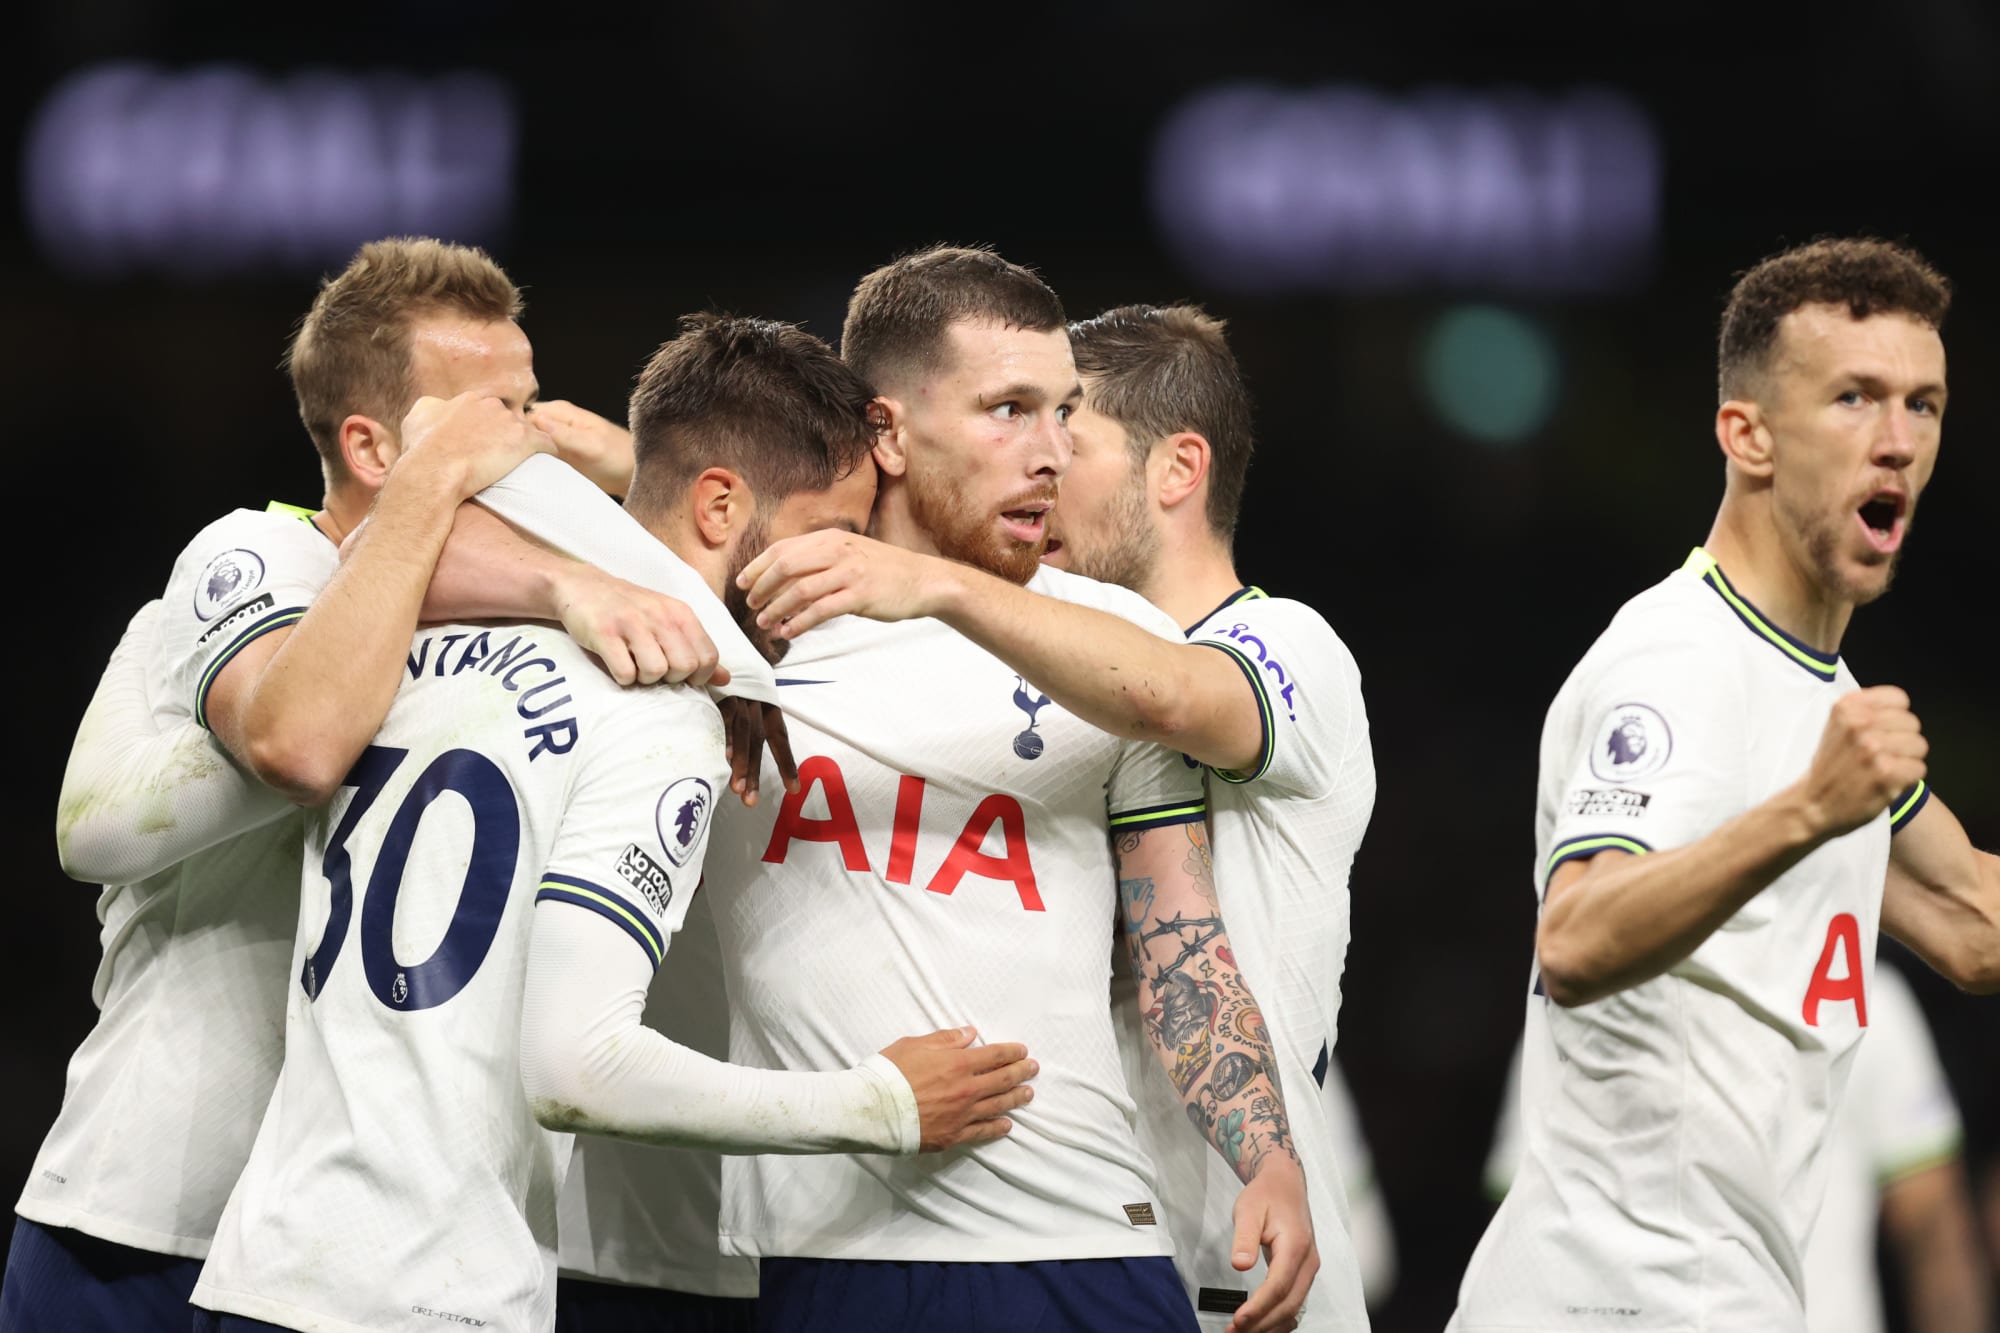 Tottenham Hotspur take all three from Everton in a professional 2-0 win